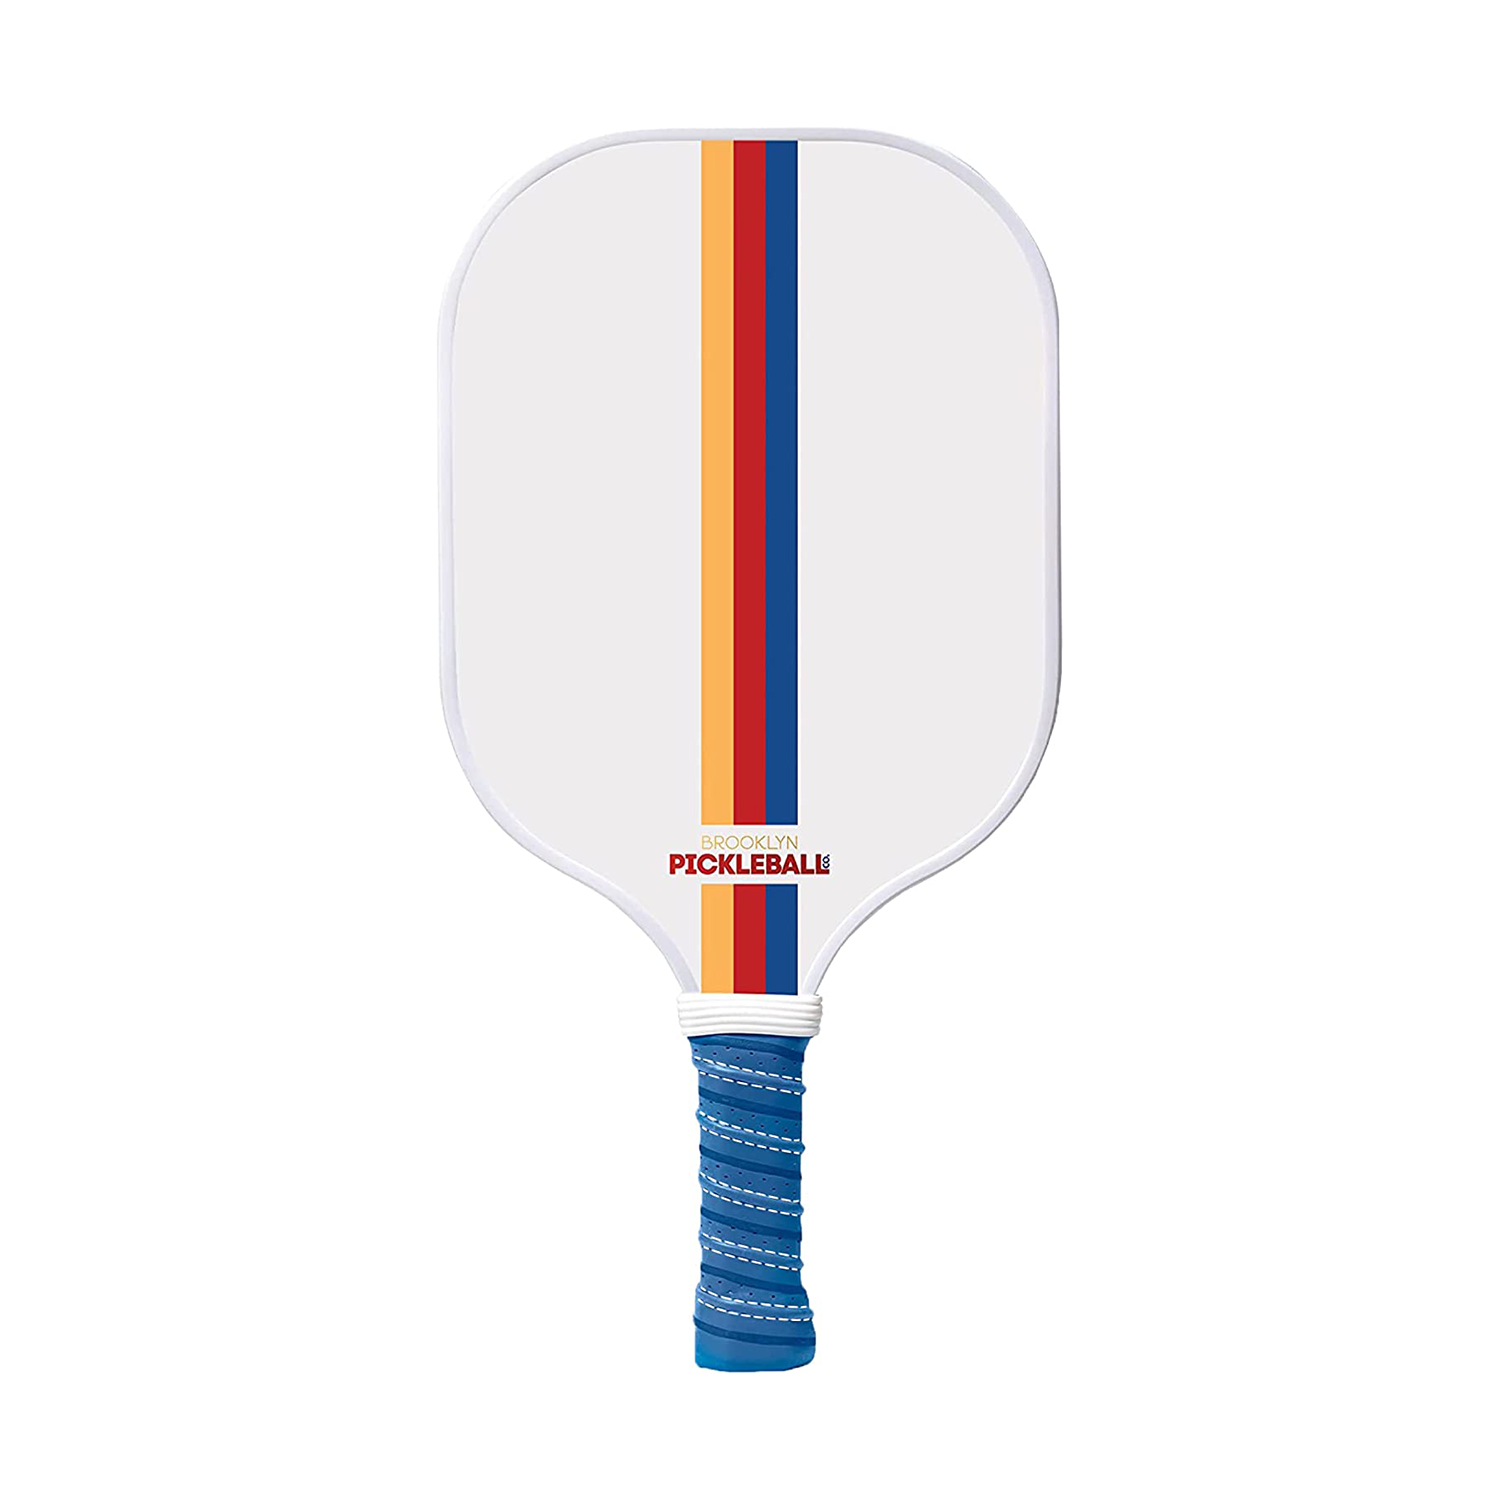 Brooklyn Pickleball Co. Pickle Ball Paddle with blue grip